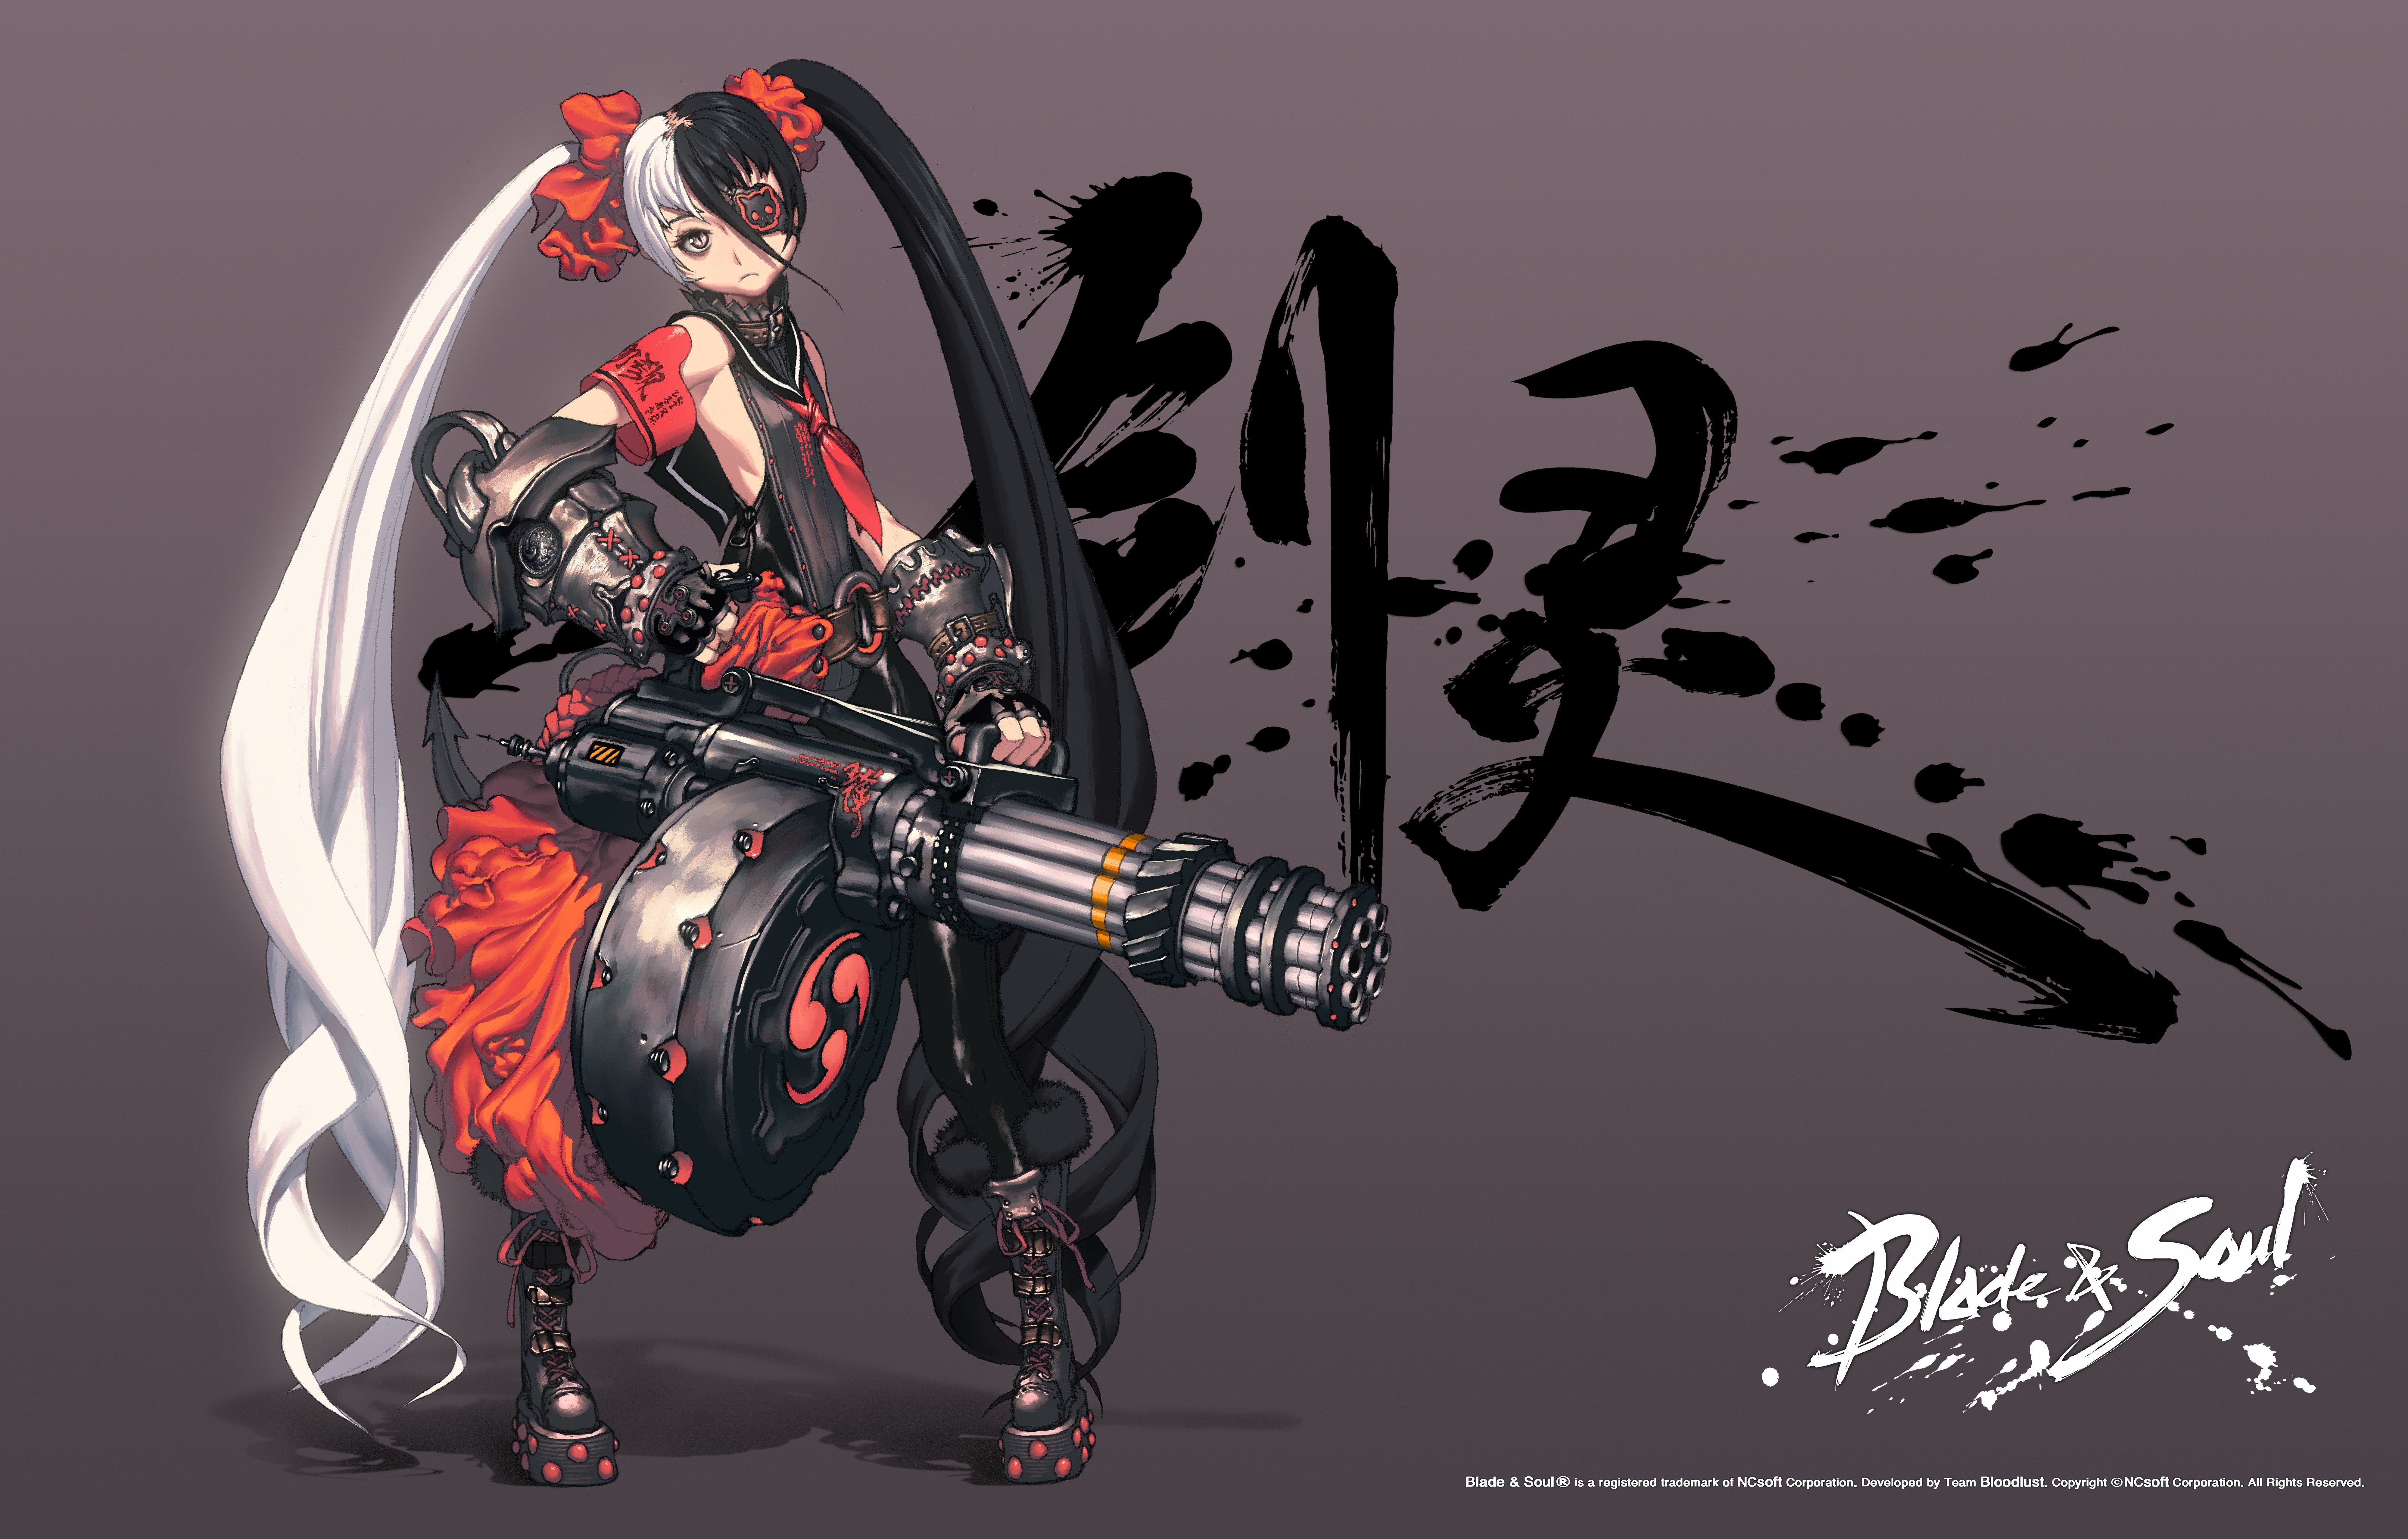 Anime 7997x5112 anime girls anime twintails girls with guns Blade & Soul weapon video games video game art video game girls anime girls with guns